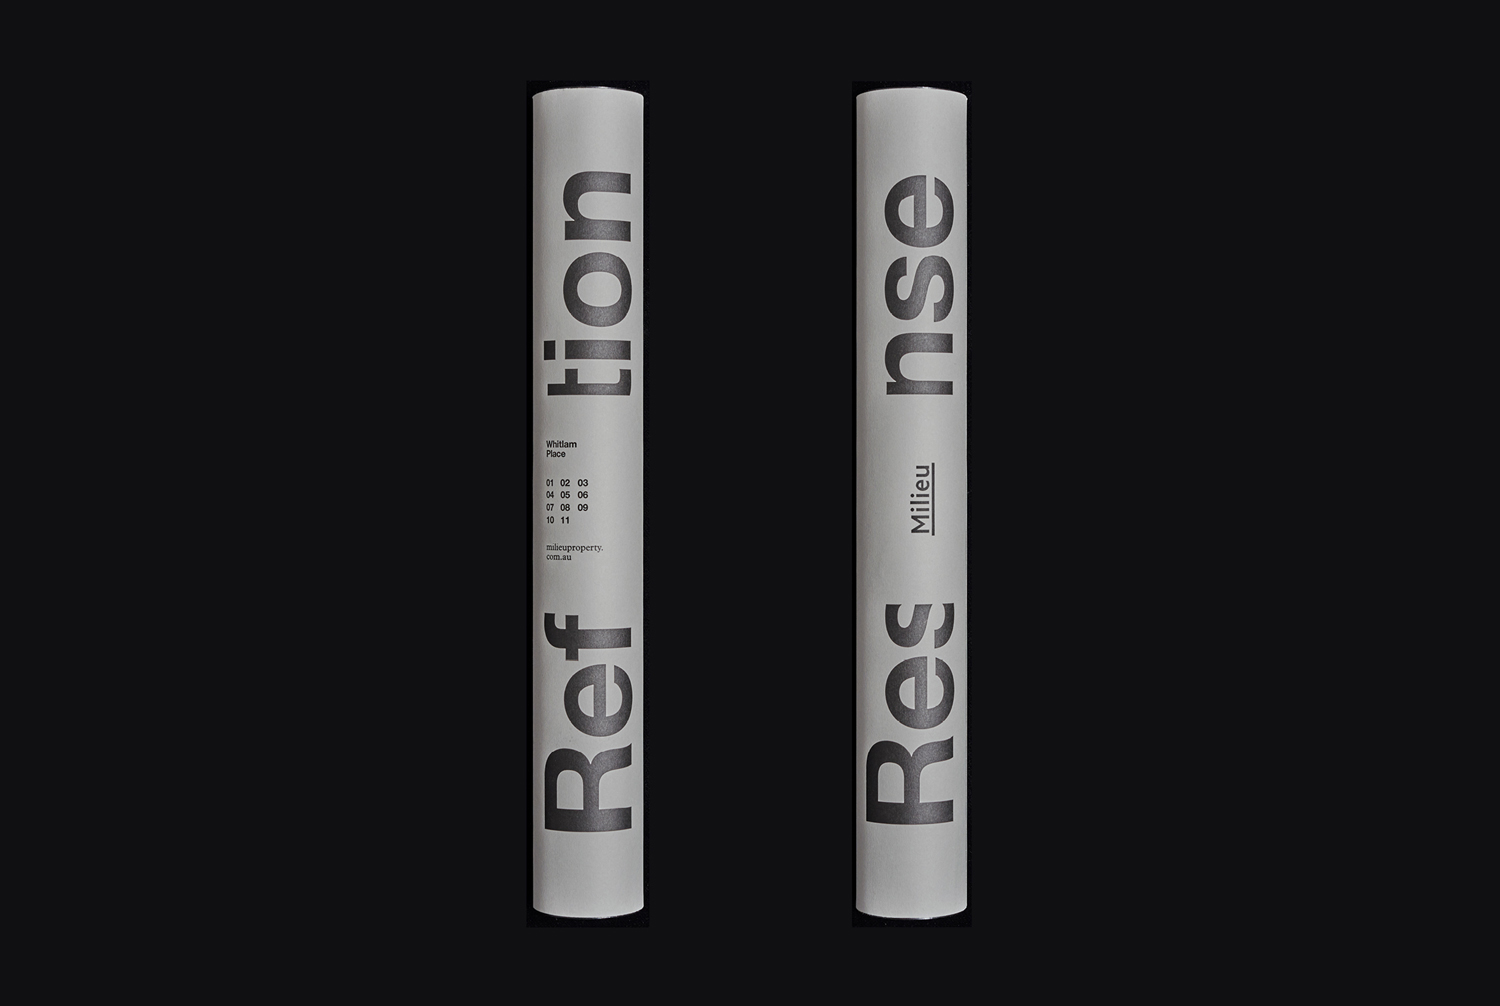 Graphic identity and postal tubes designed by Studio Hi Ho for Fitzroy development Whitlam Place